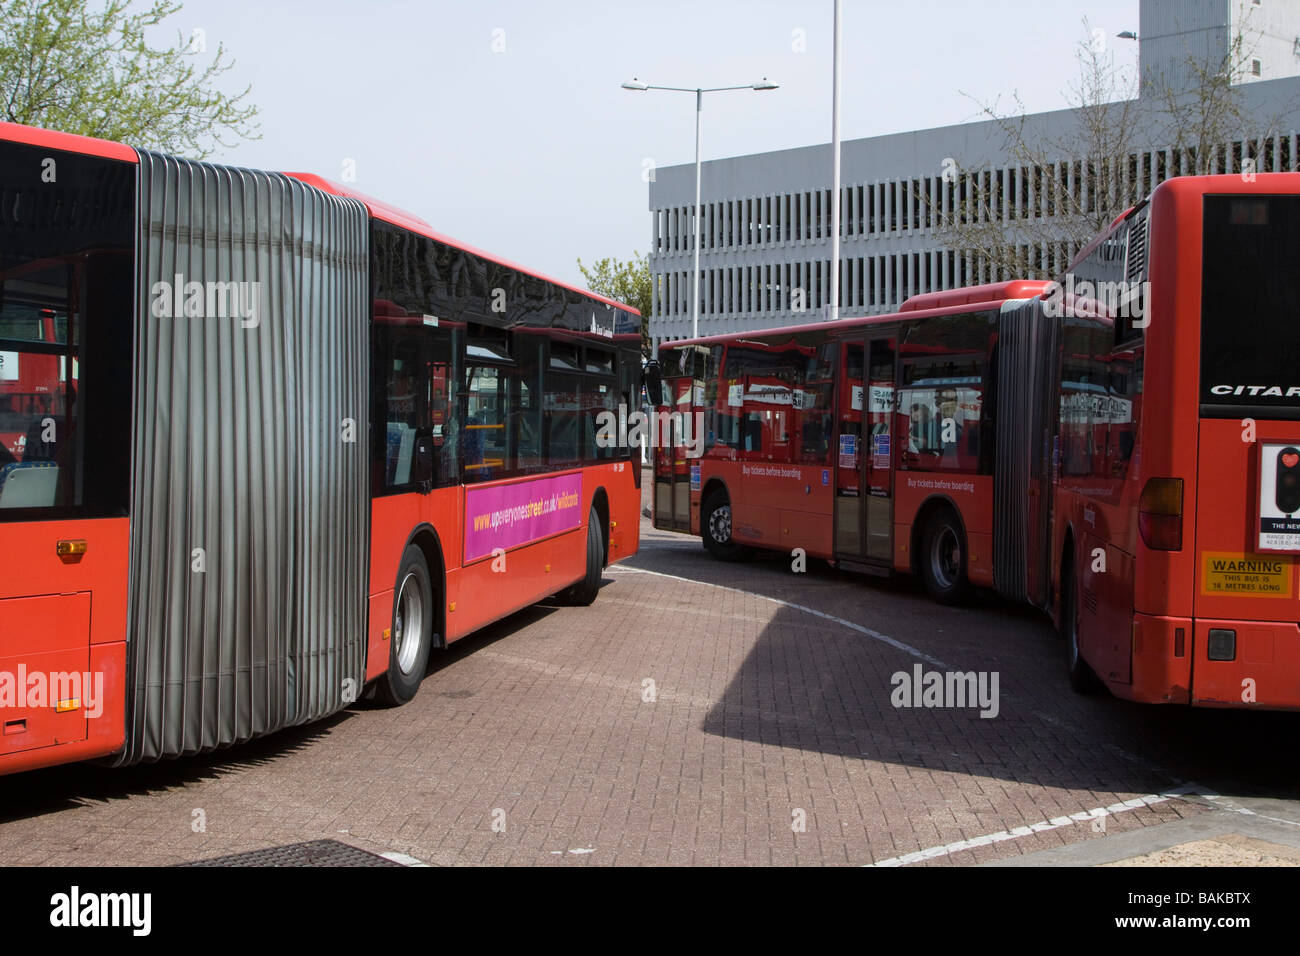 Articulated buses (either motorbuses or trolleybuses), also known as tandem buses ilford essex england uk gb Stock Photo